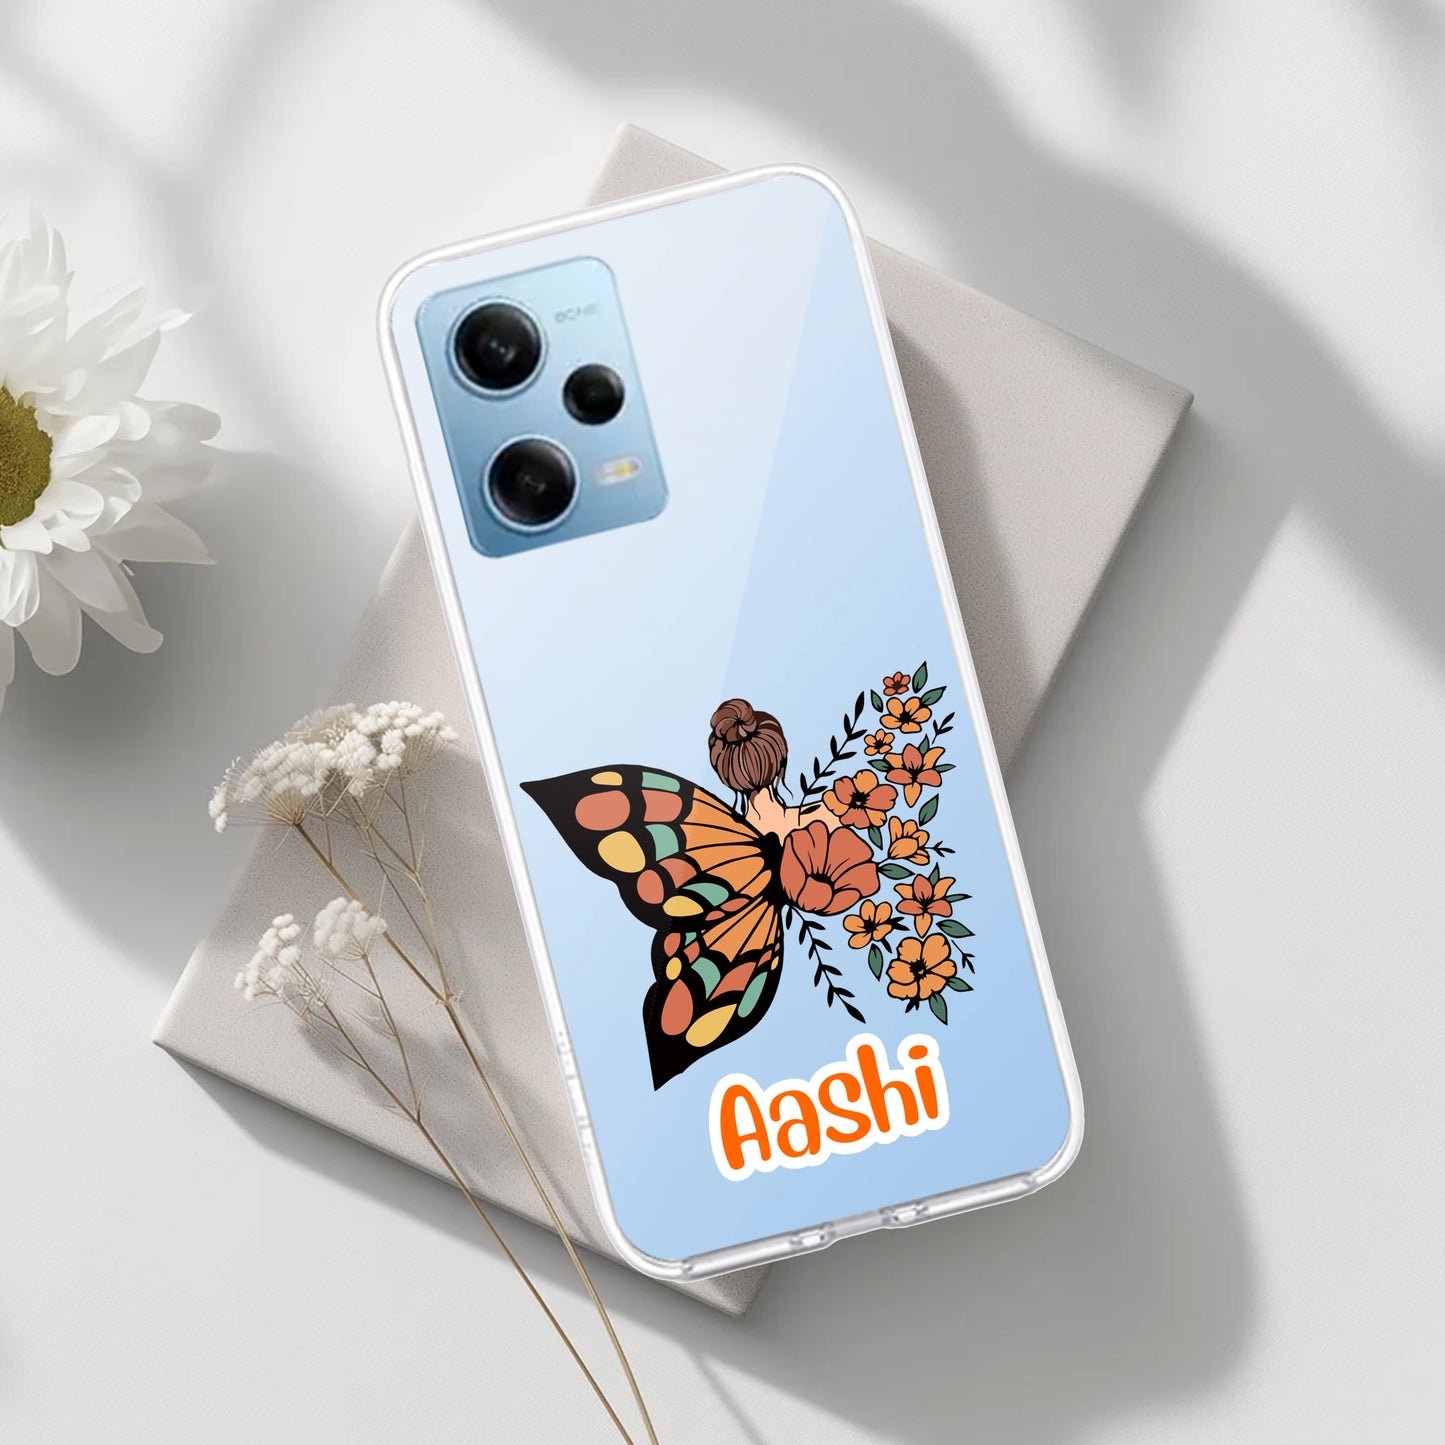 Butterfly Customize Transparent Silicon Case For Redmi/Xiaomi